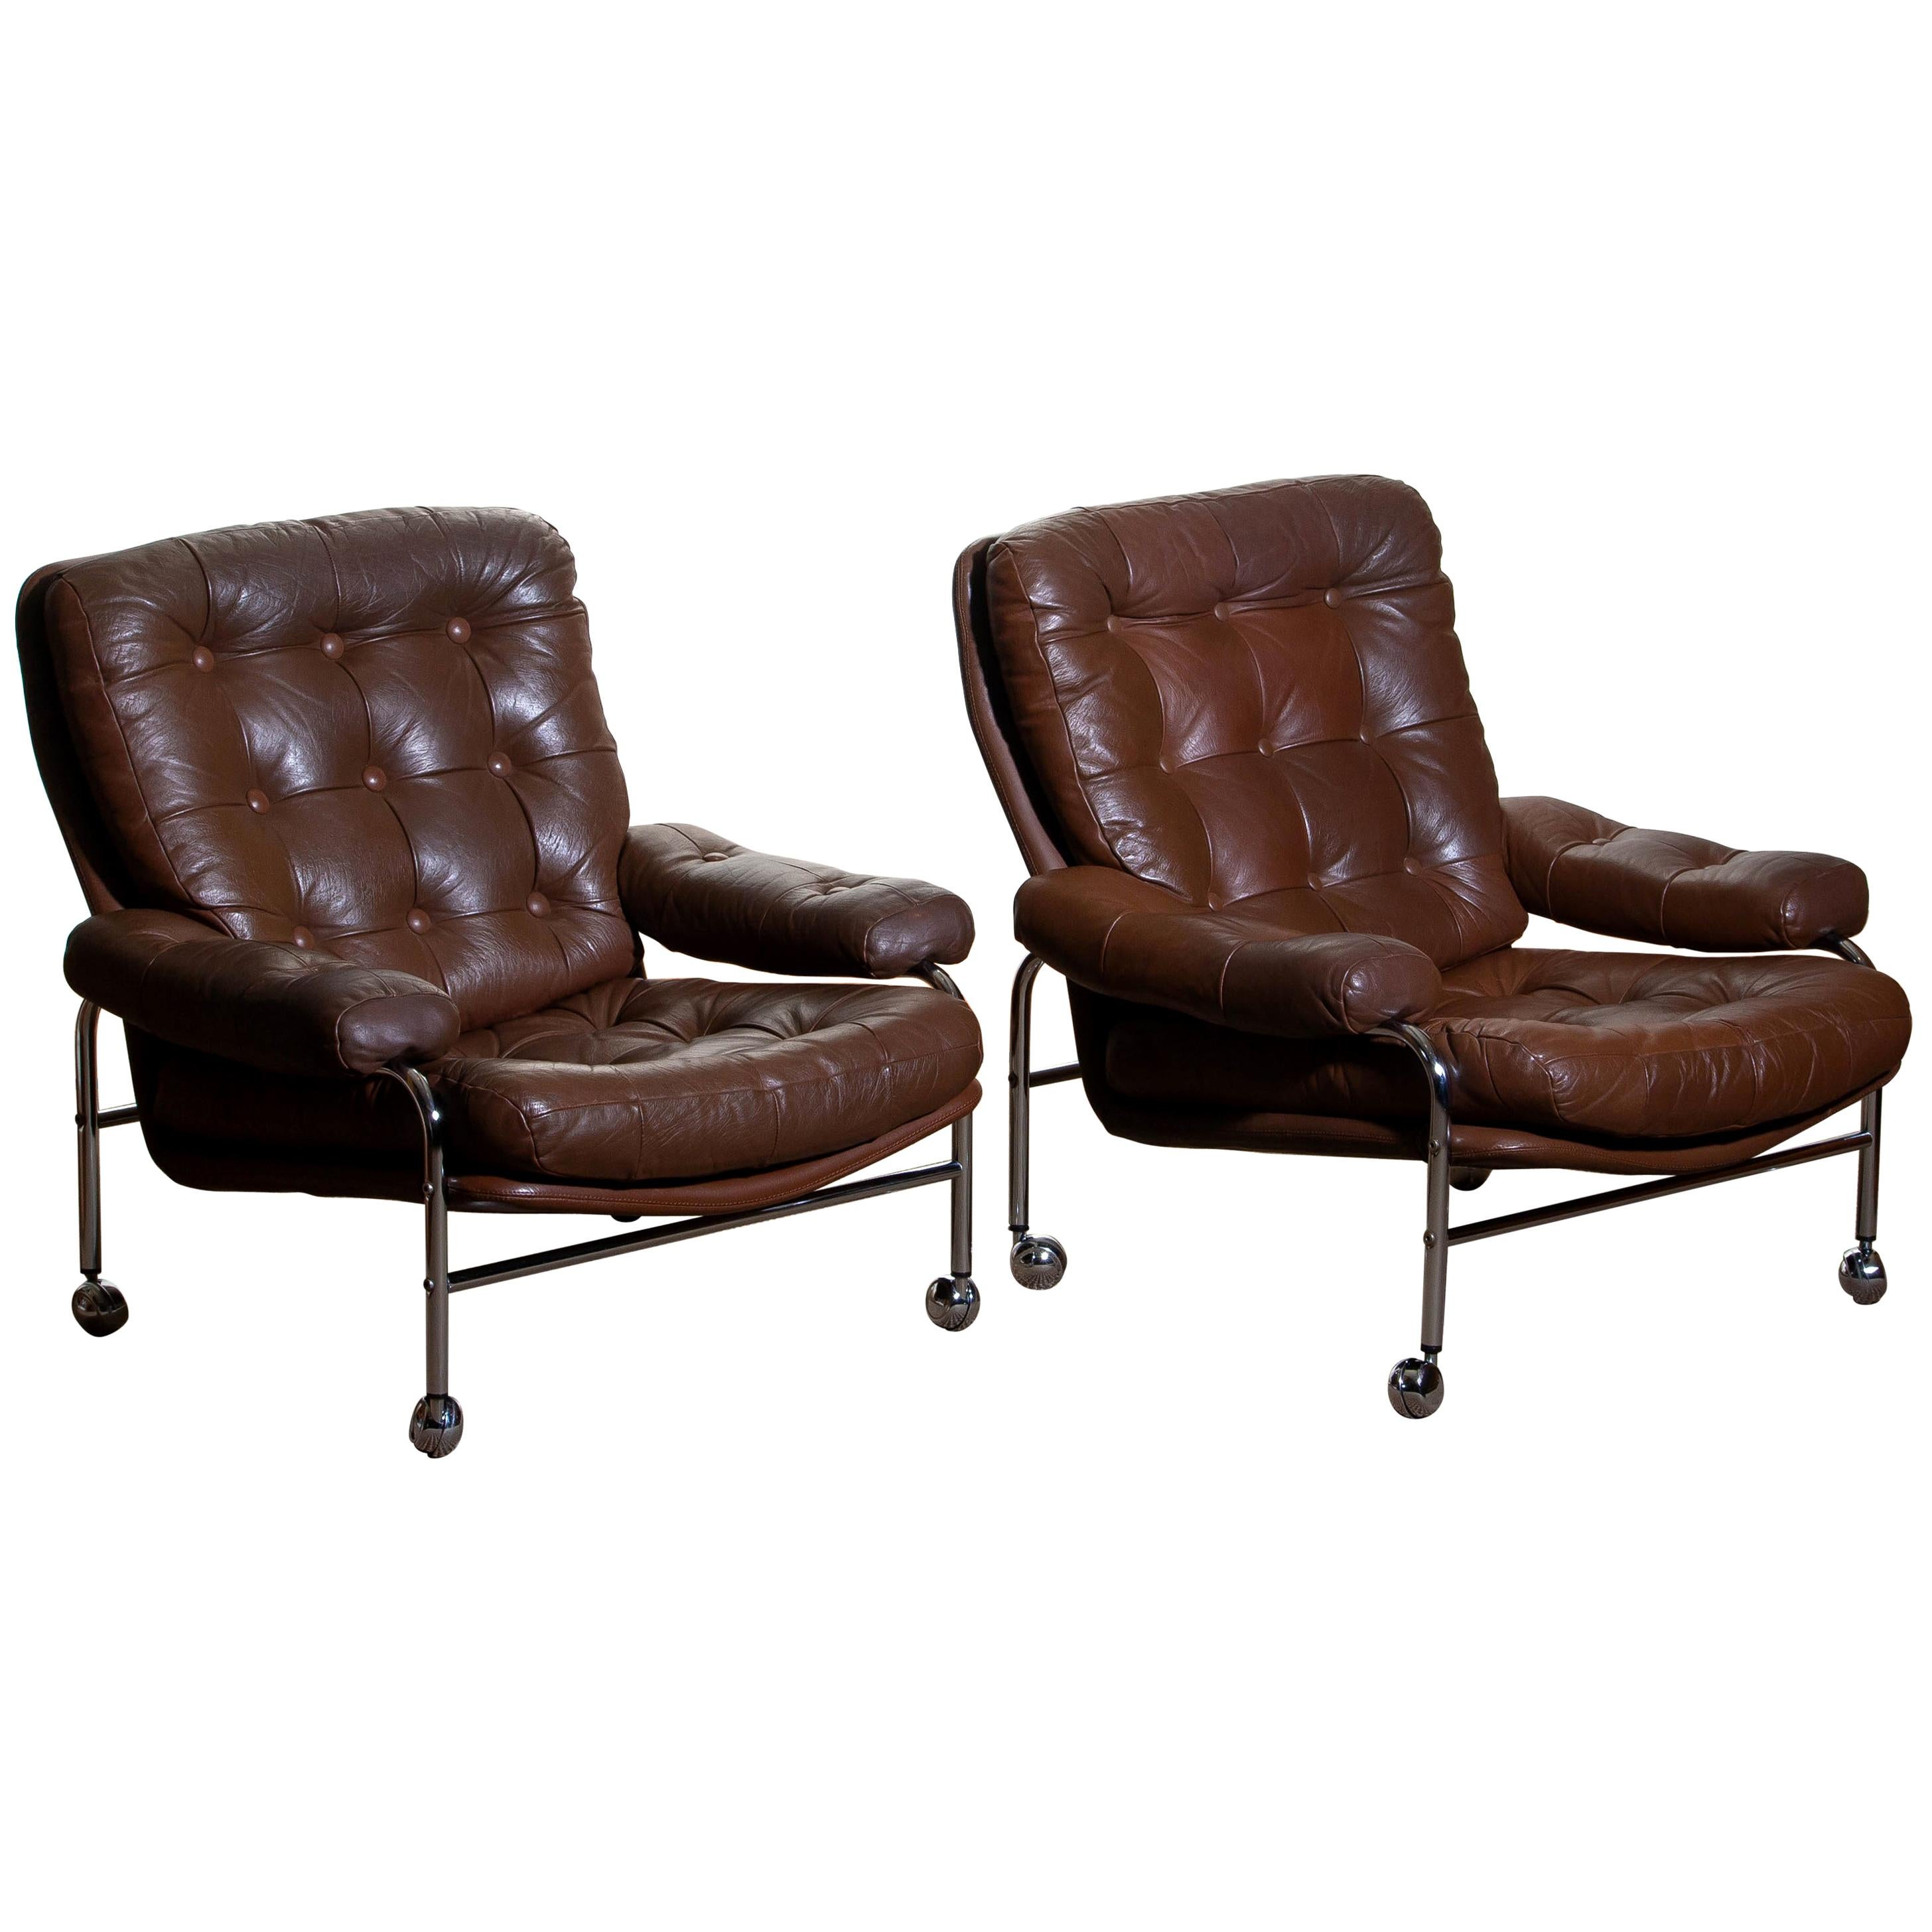 1970s, Chrome and Brown Leather Easy / Lounge Chairs by Scapa Rydaholm, Sweden